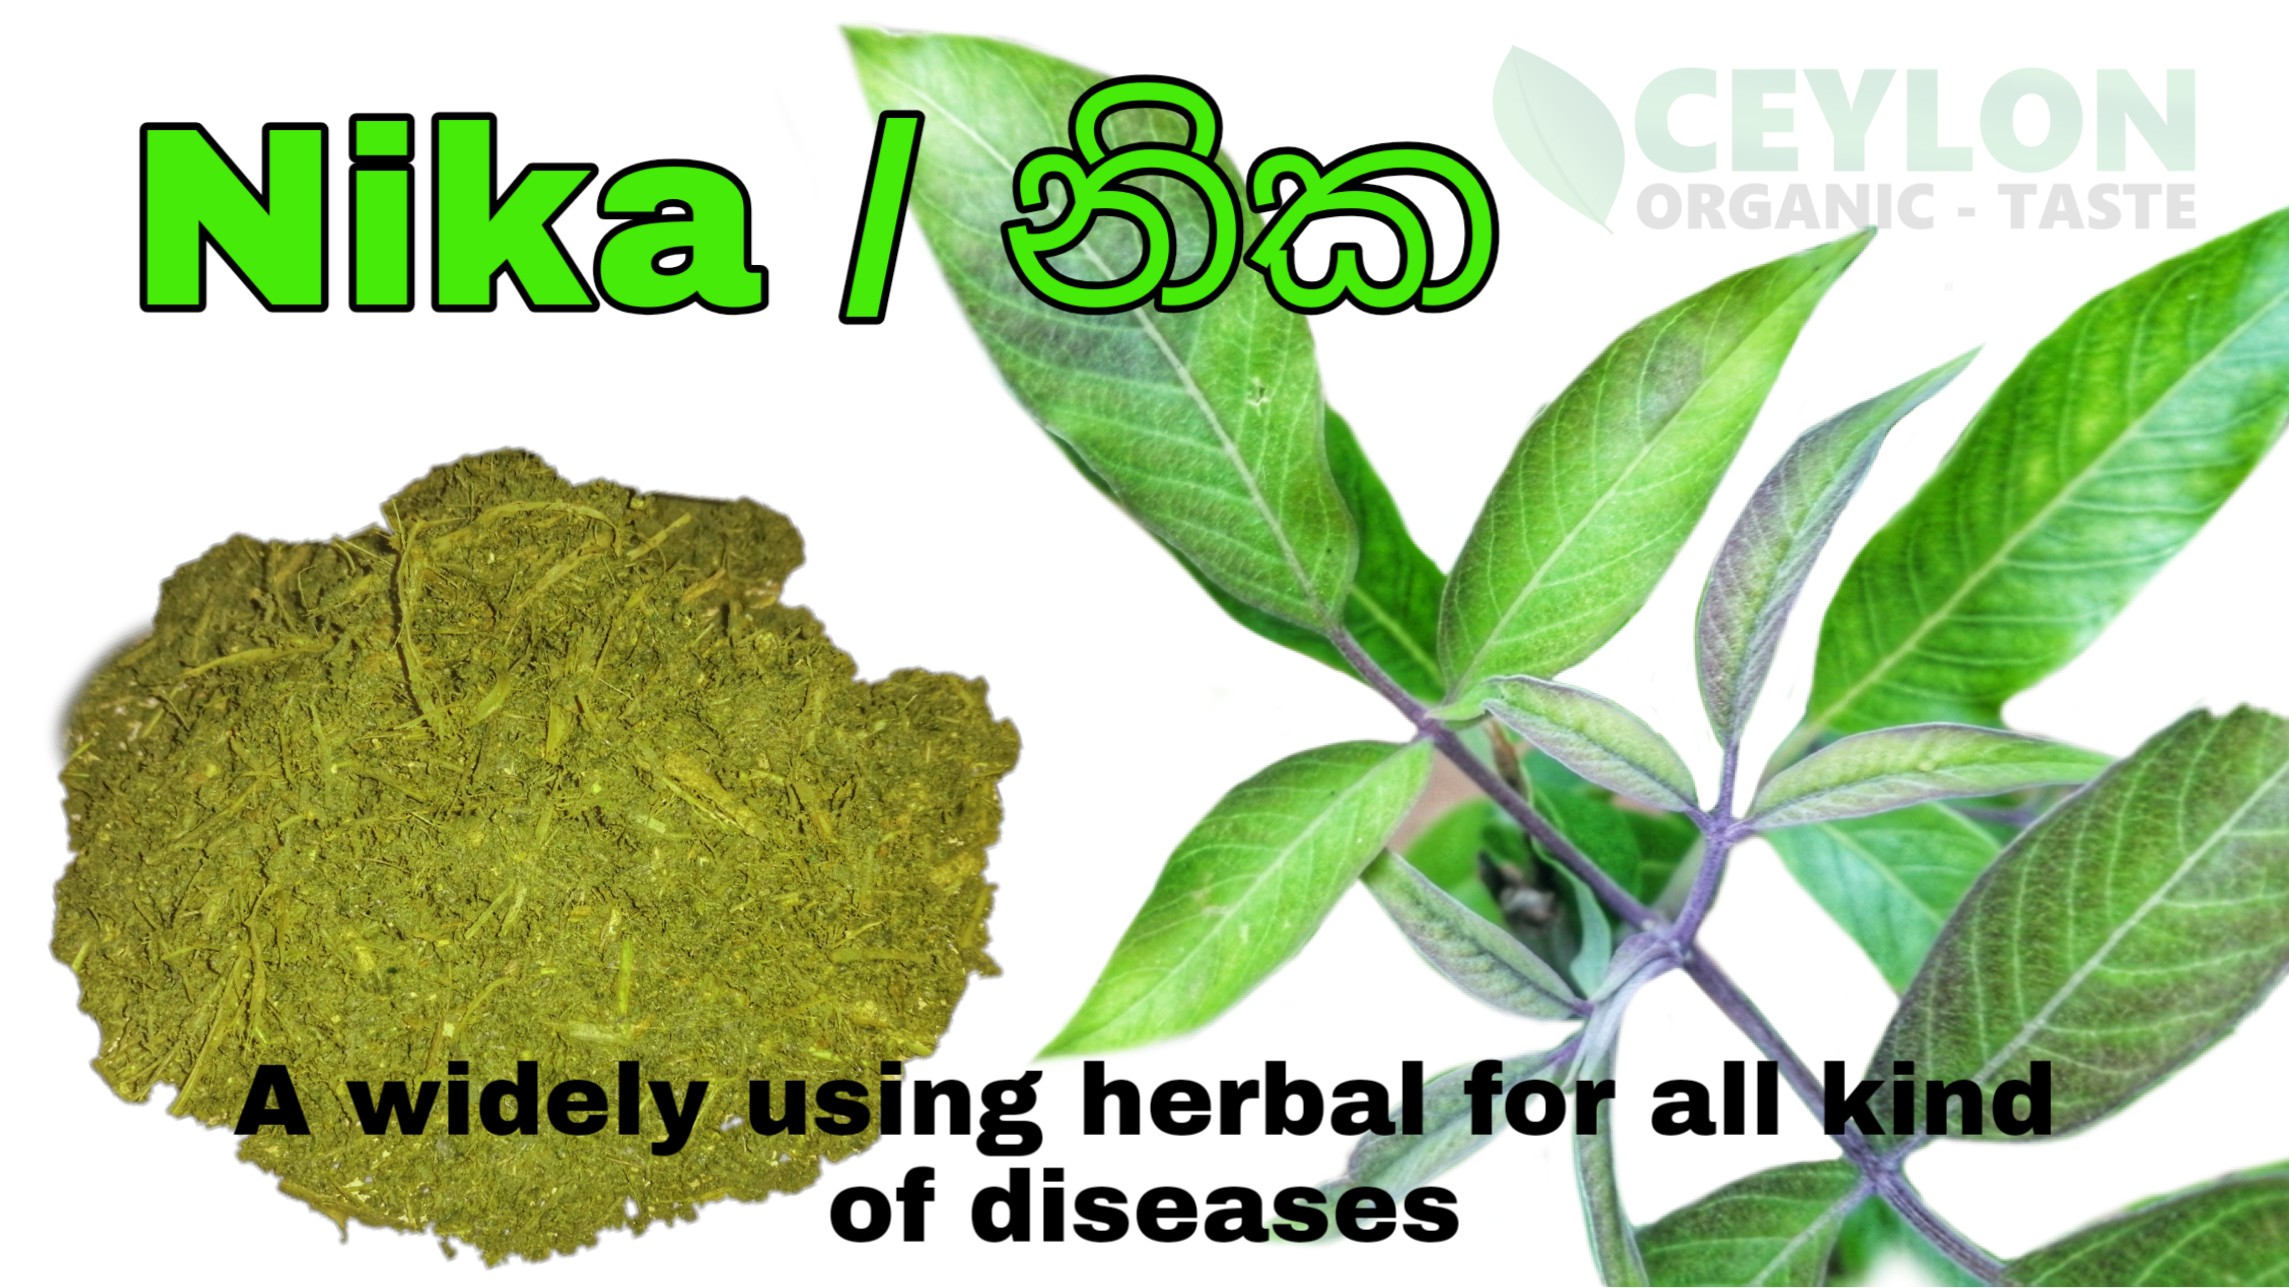 Nika – A widely used Valuable natural herb in Indigenous Medicine